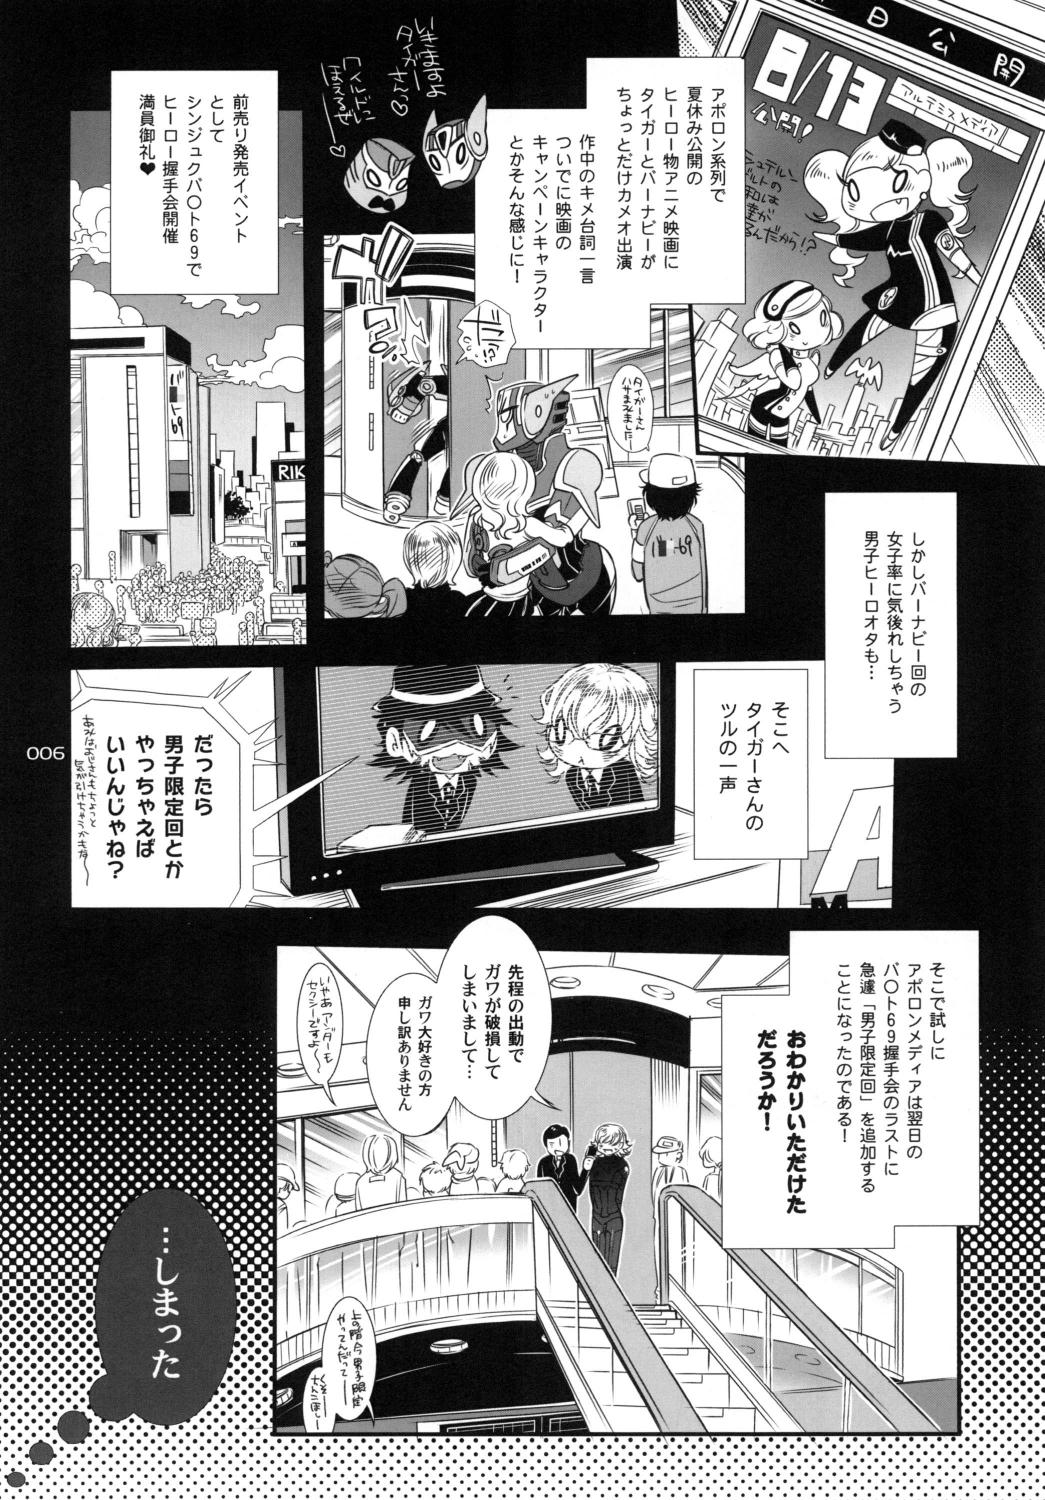 Unshaved バ○ト69で僕と握手! - Tiger and bunny Blow Job Contest - Page 6